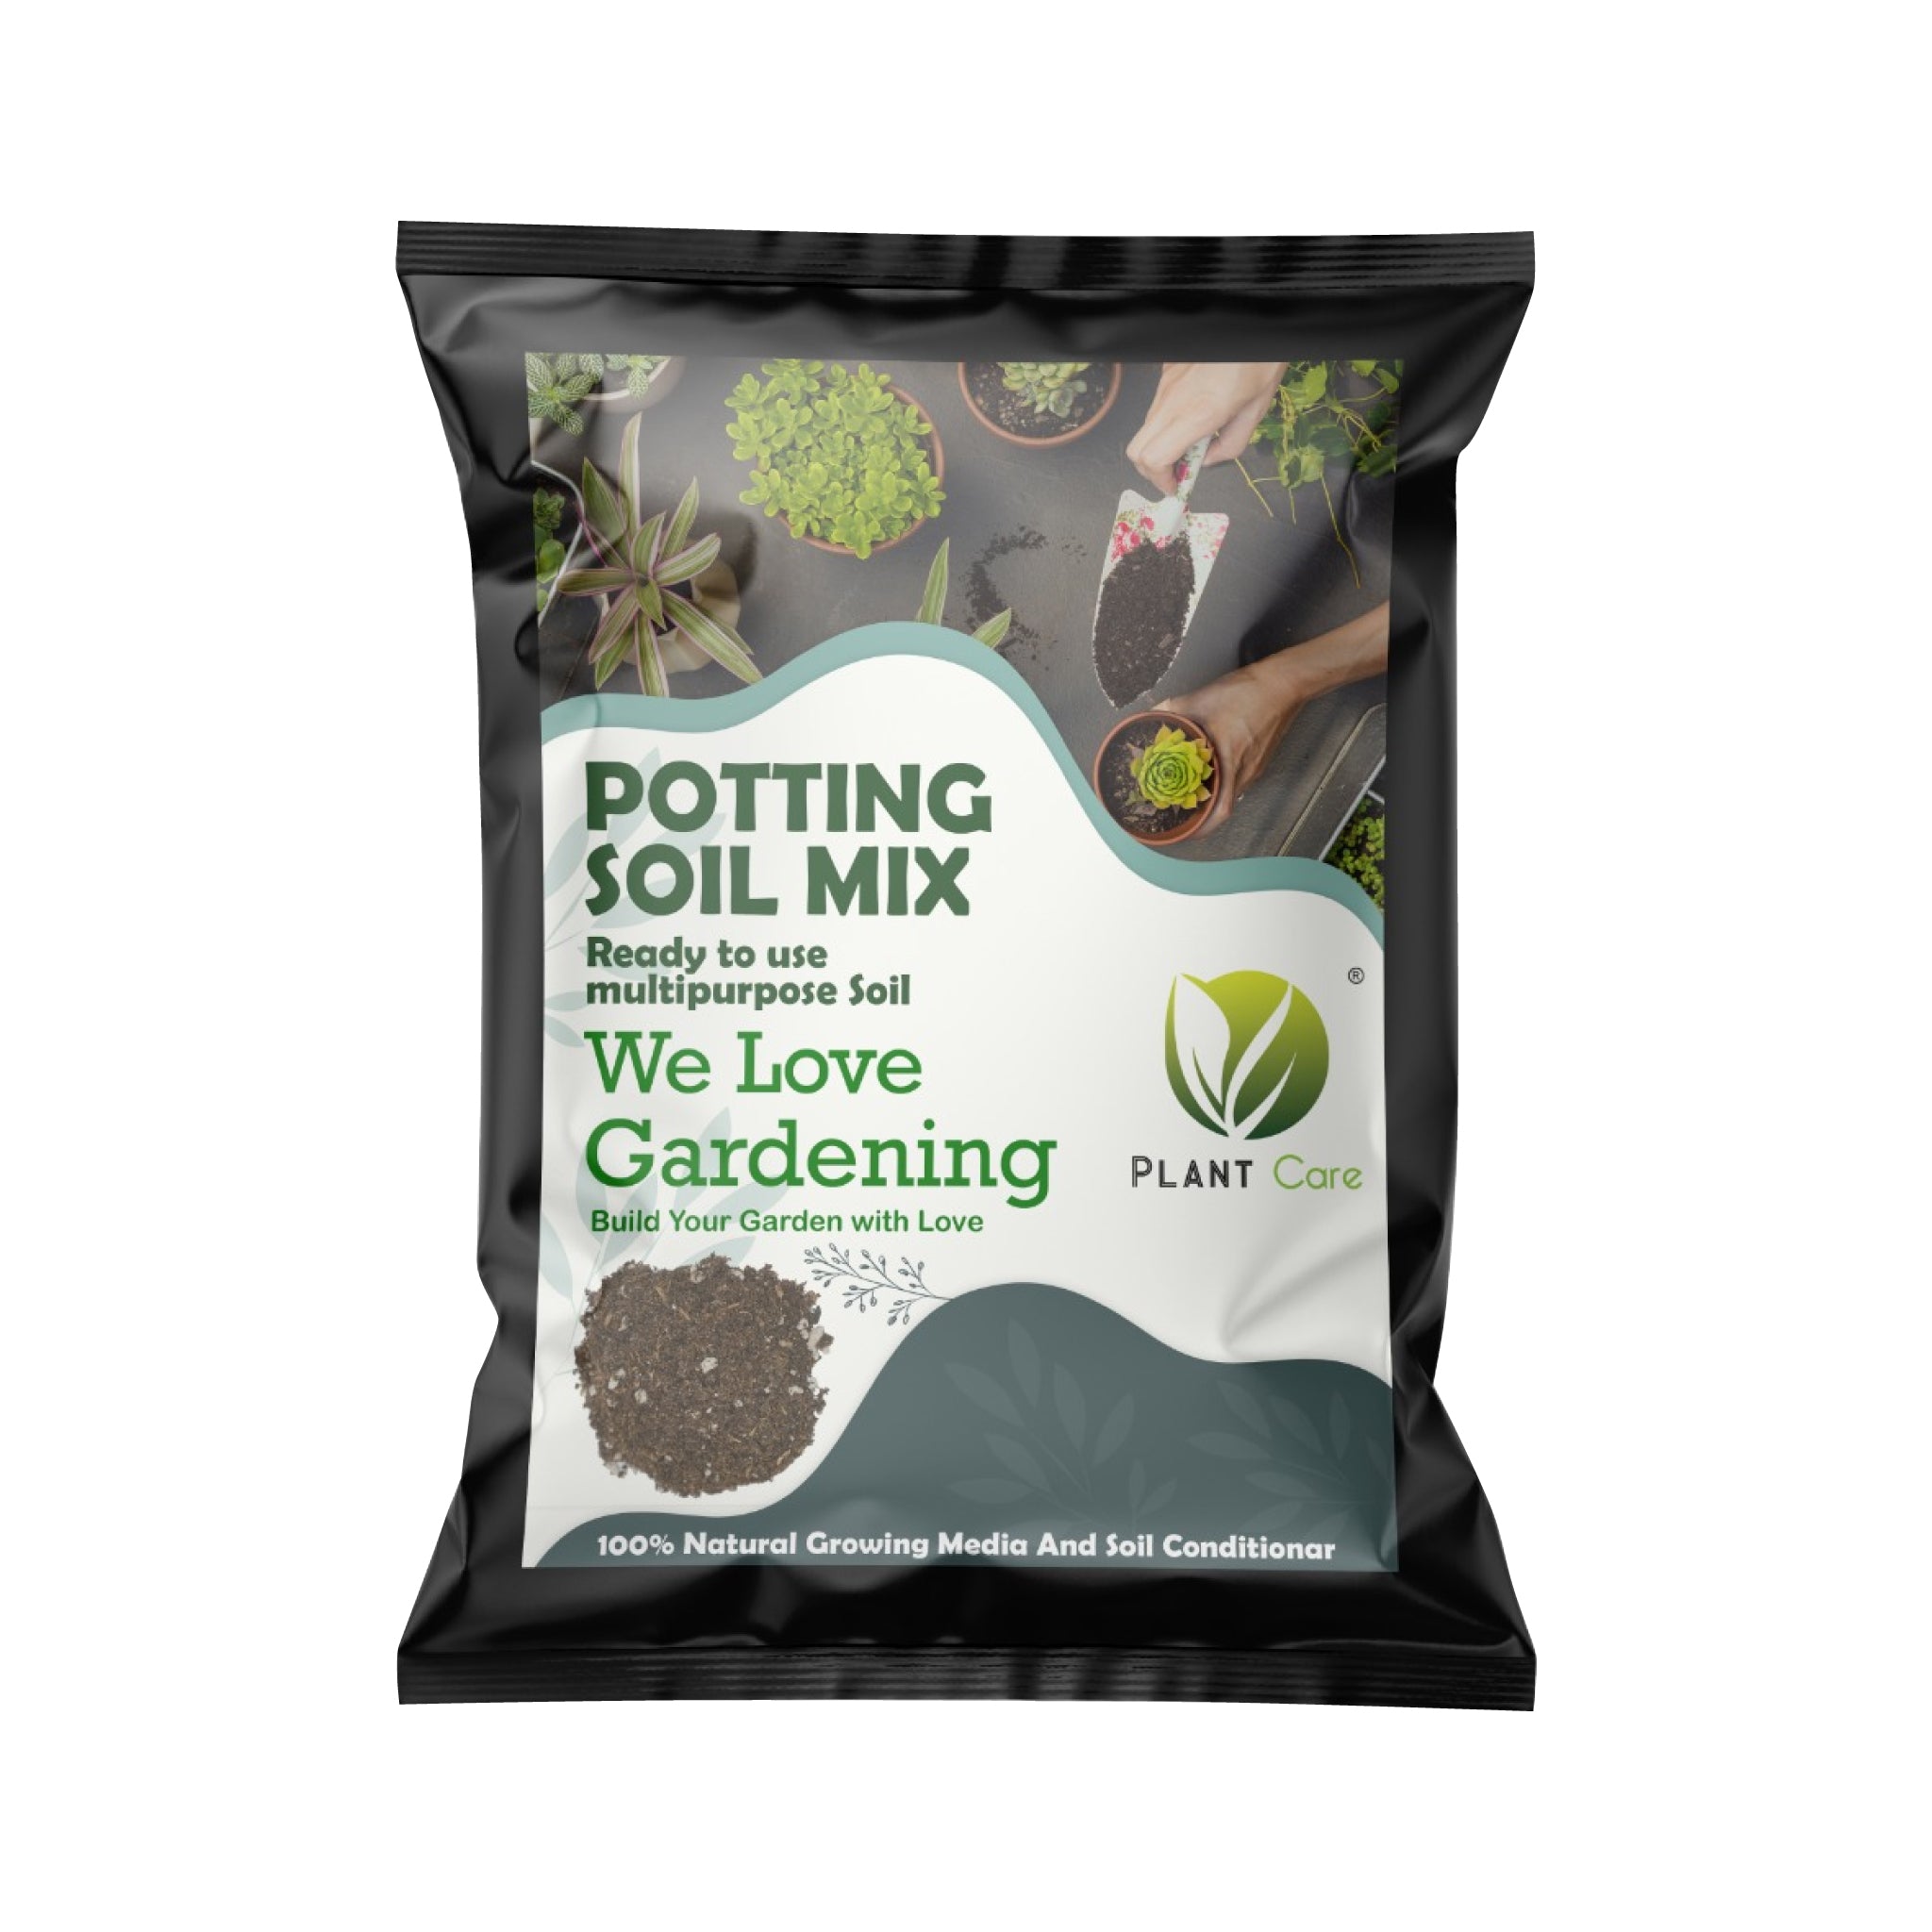 Grow strong, healthy plants with our premium potting soil mix